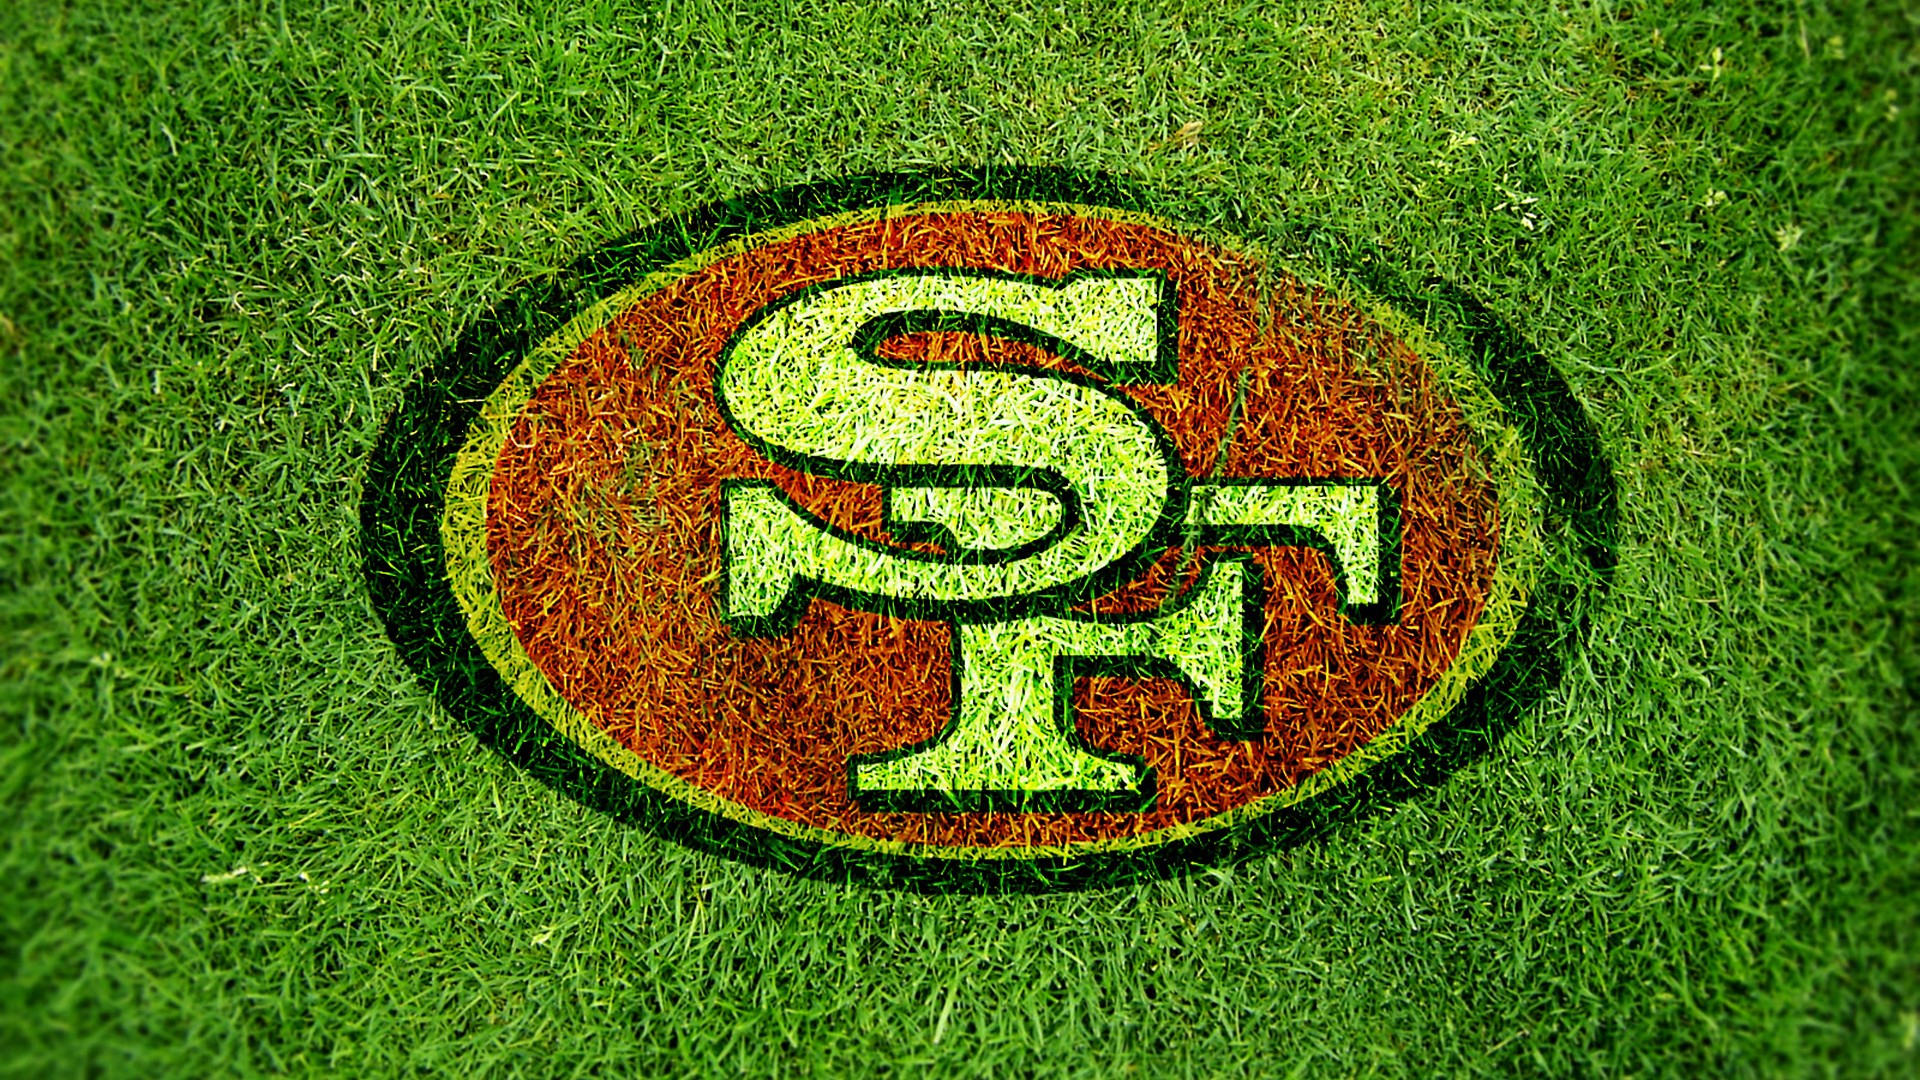 HD Desktop Wallpaper San Francisco 49ers With high-resolution 1920X1080 pixel. You can use this wallpaper for your Mac or Windows Desktop Background, iPhone, Android or Tablet and another Smartphone device